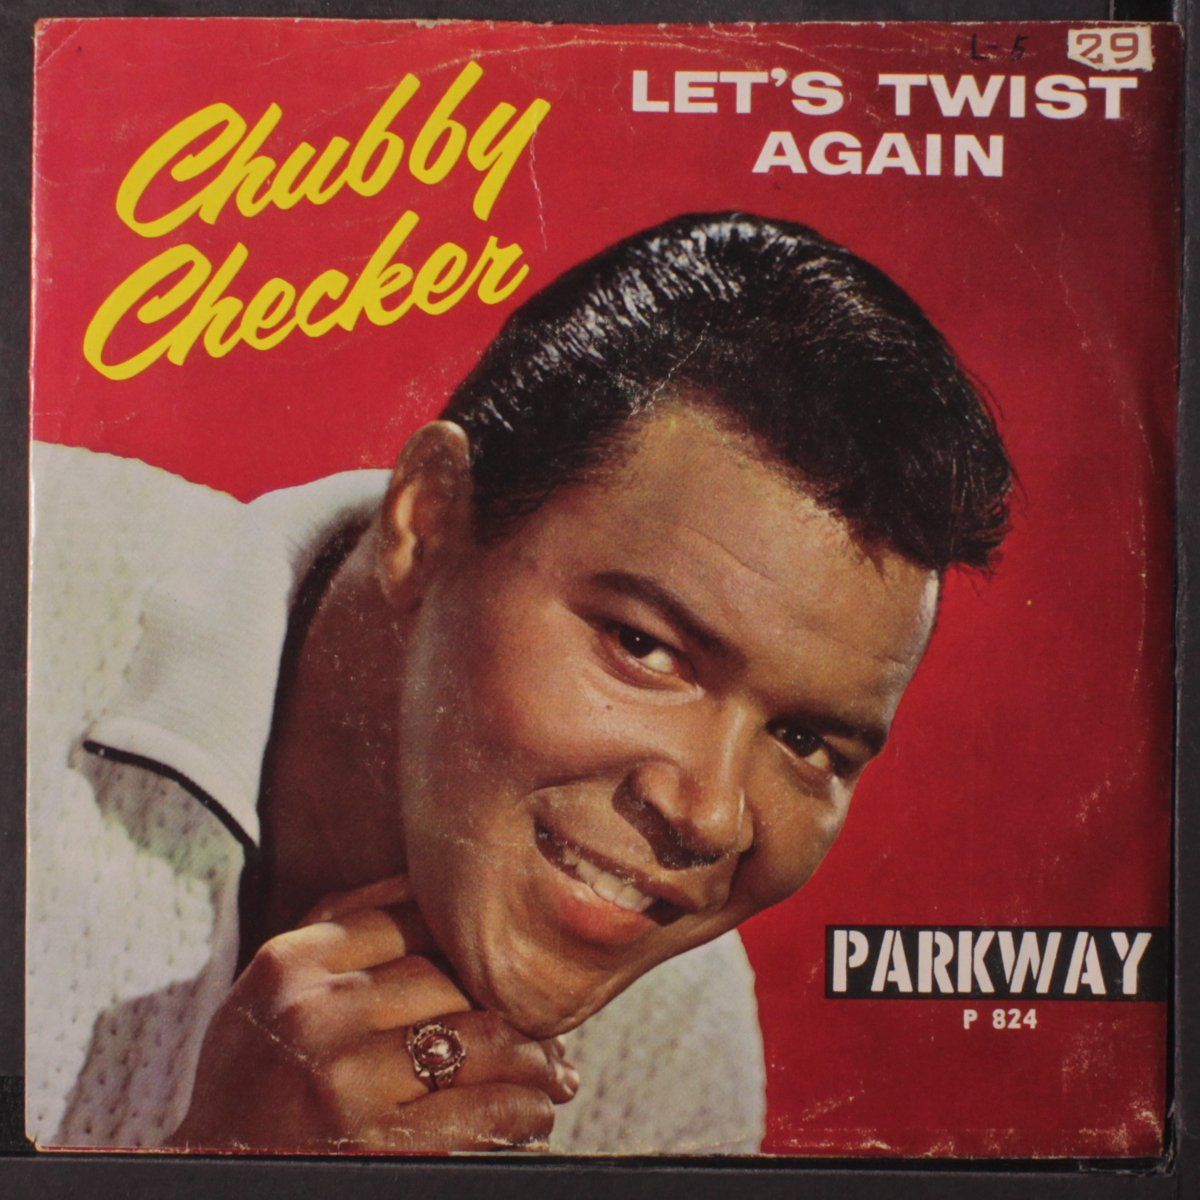 Midnight reccomend Chubby checker lets twist